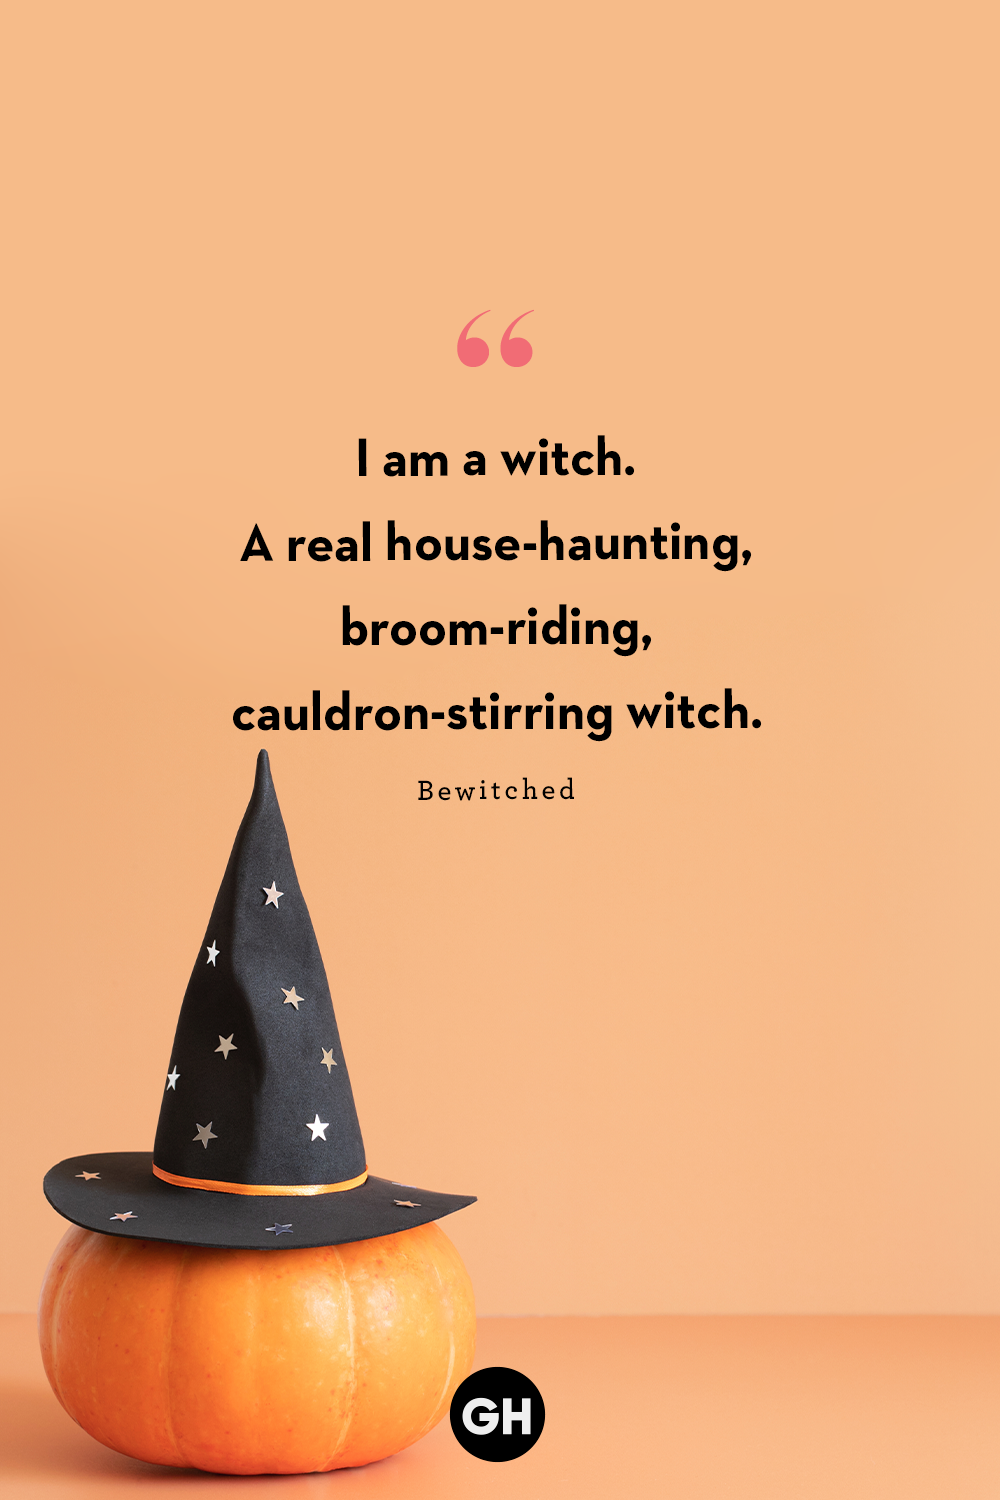 40 Best Witch Quotes - Witch Quotes and Sayings for Halloween